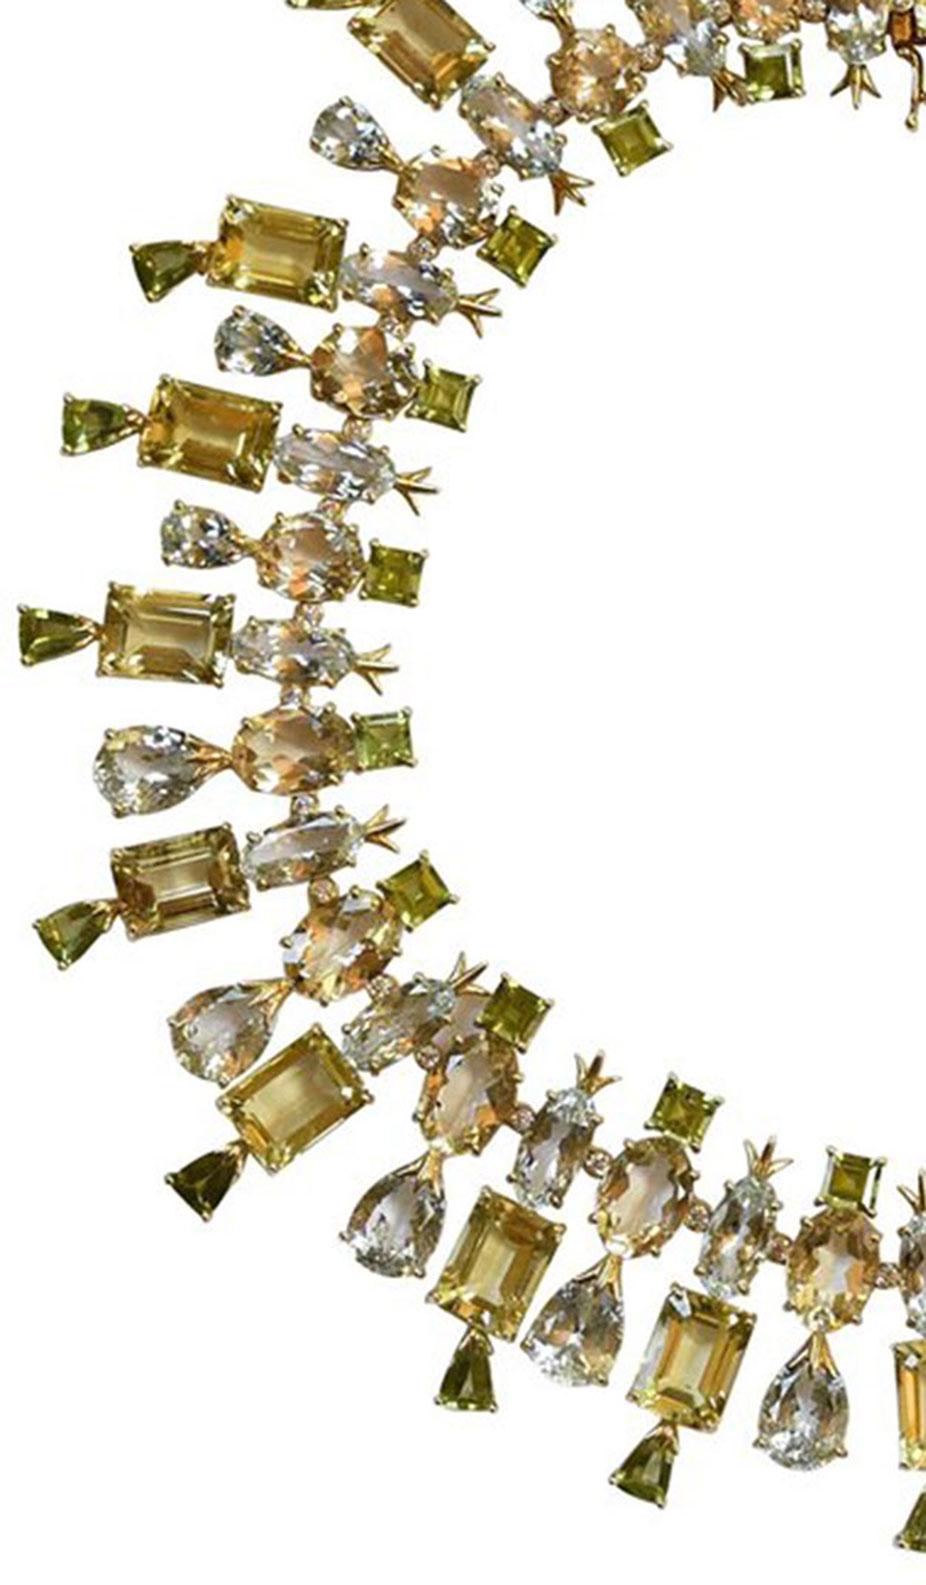 Sensational Aquamarine (app. 125 ct.), Citrine (app. 147 ct.),  Peridot (app. 44 ct.) and Scapolite (app. 85 ct.) Necklace beautifully hand crafted in 18k Gold by Tony Duquette, Designer Extraordinaire! 14.63 in long x 1.75 in wide; signed: TONY